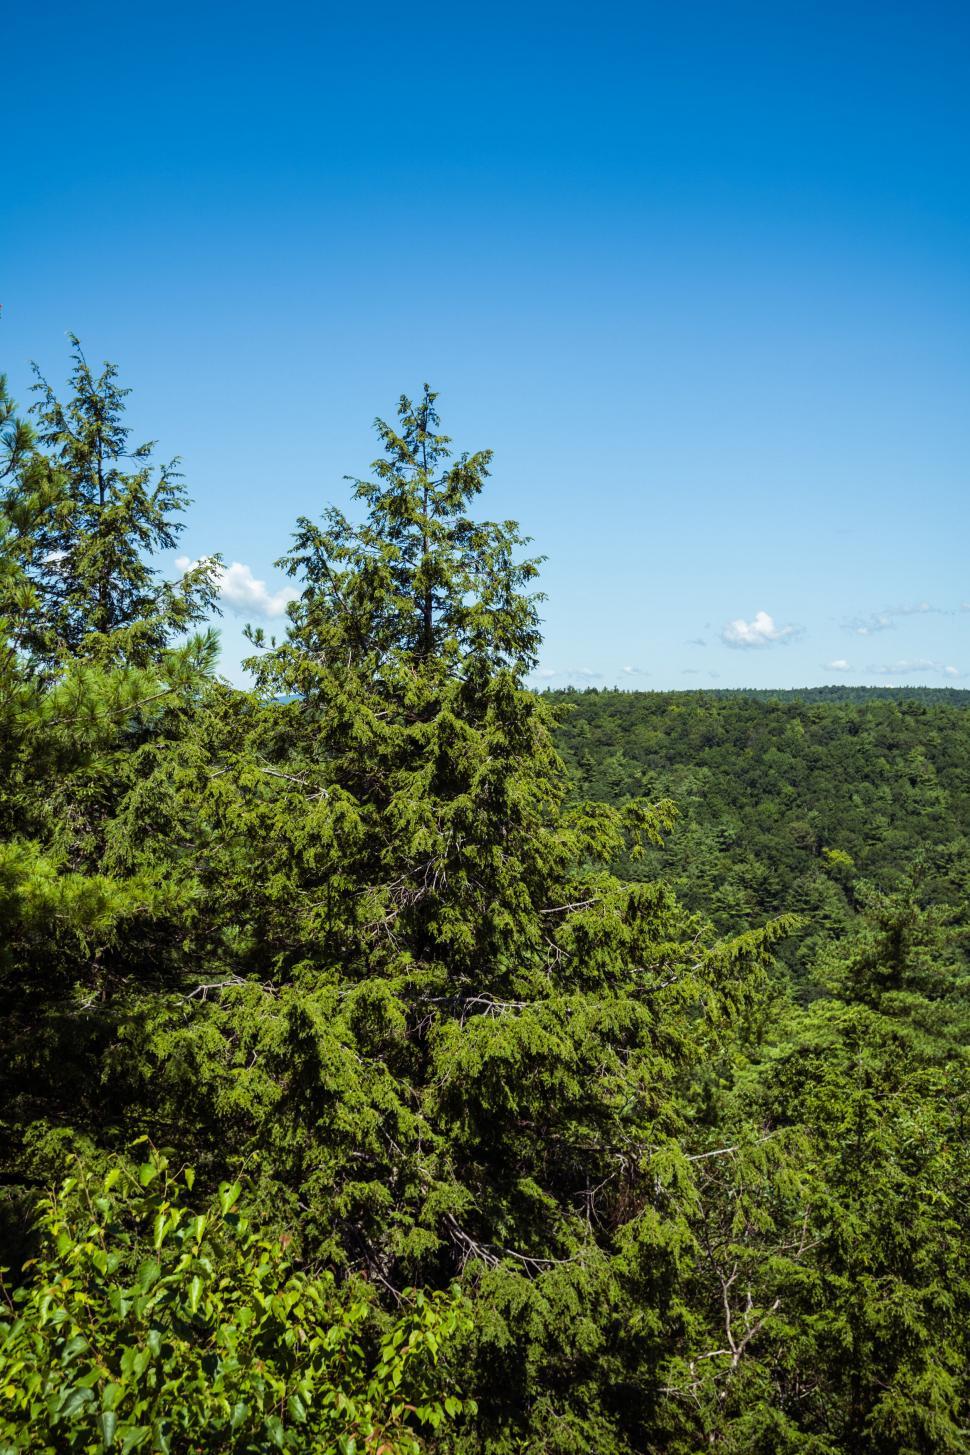 Free Image of Lush Green Forest under a Blue Sky 